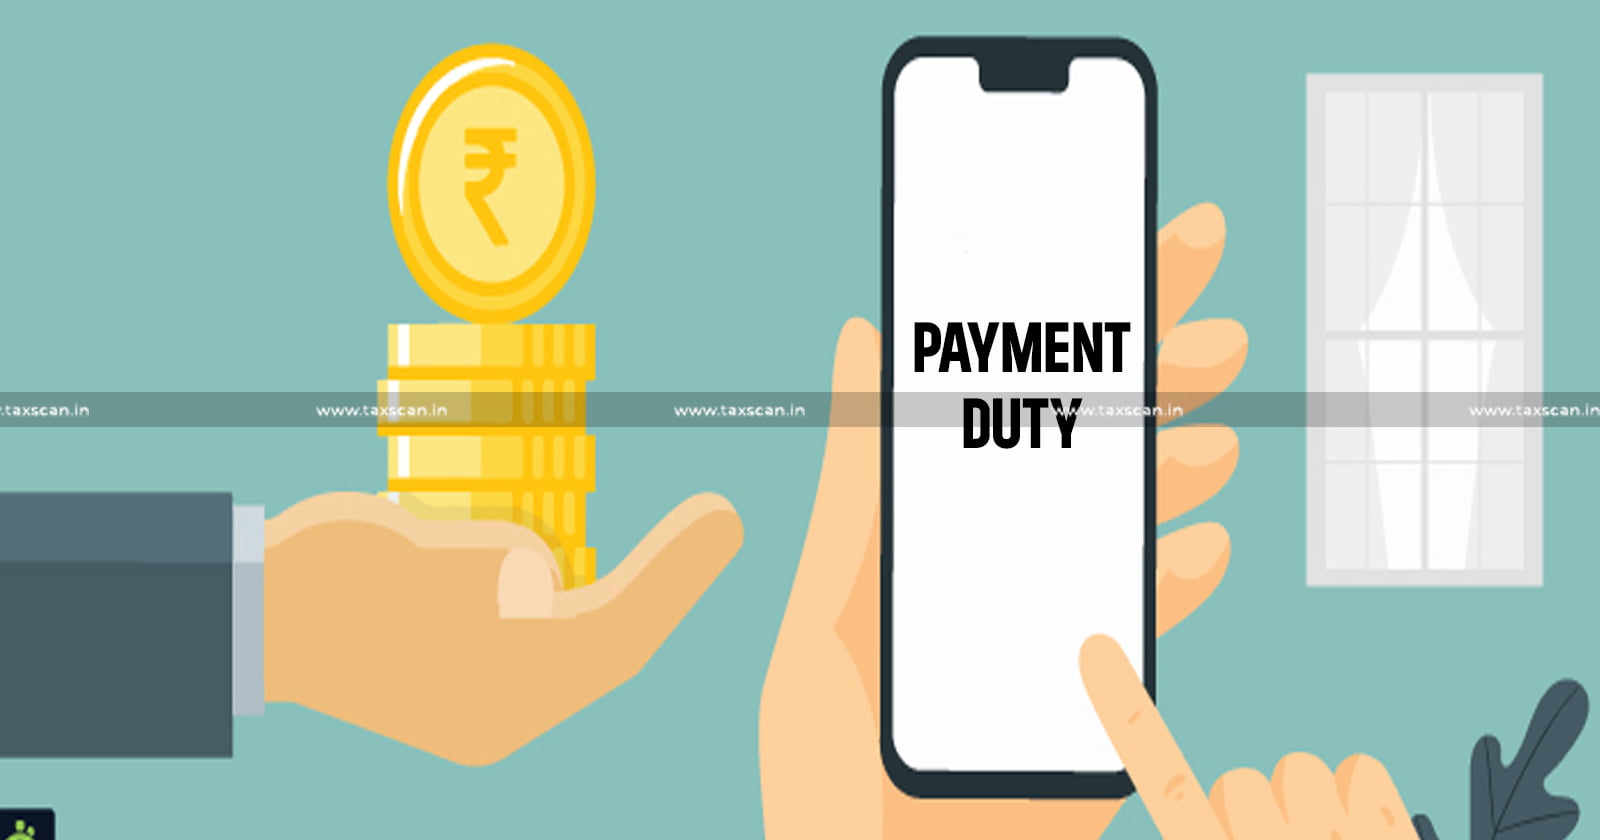 Payments - Cenvat Account - payment of Duty - payment of Duty in Cash - CESTAT - taxscan